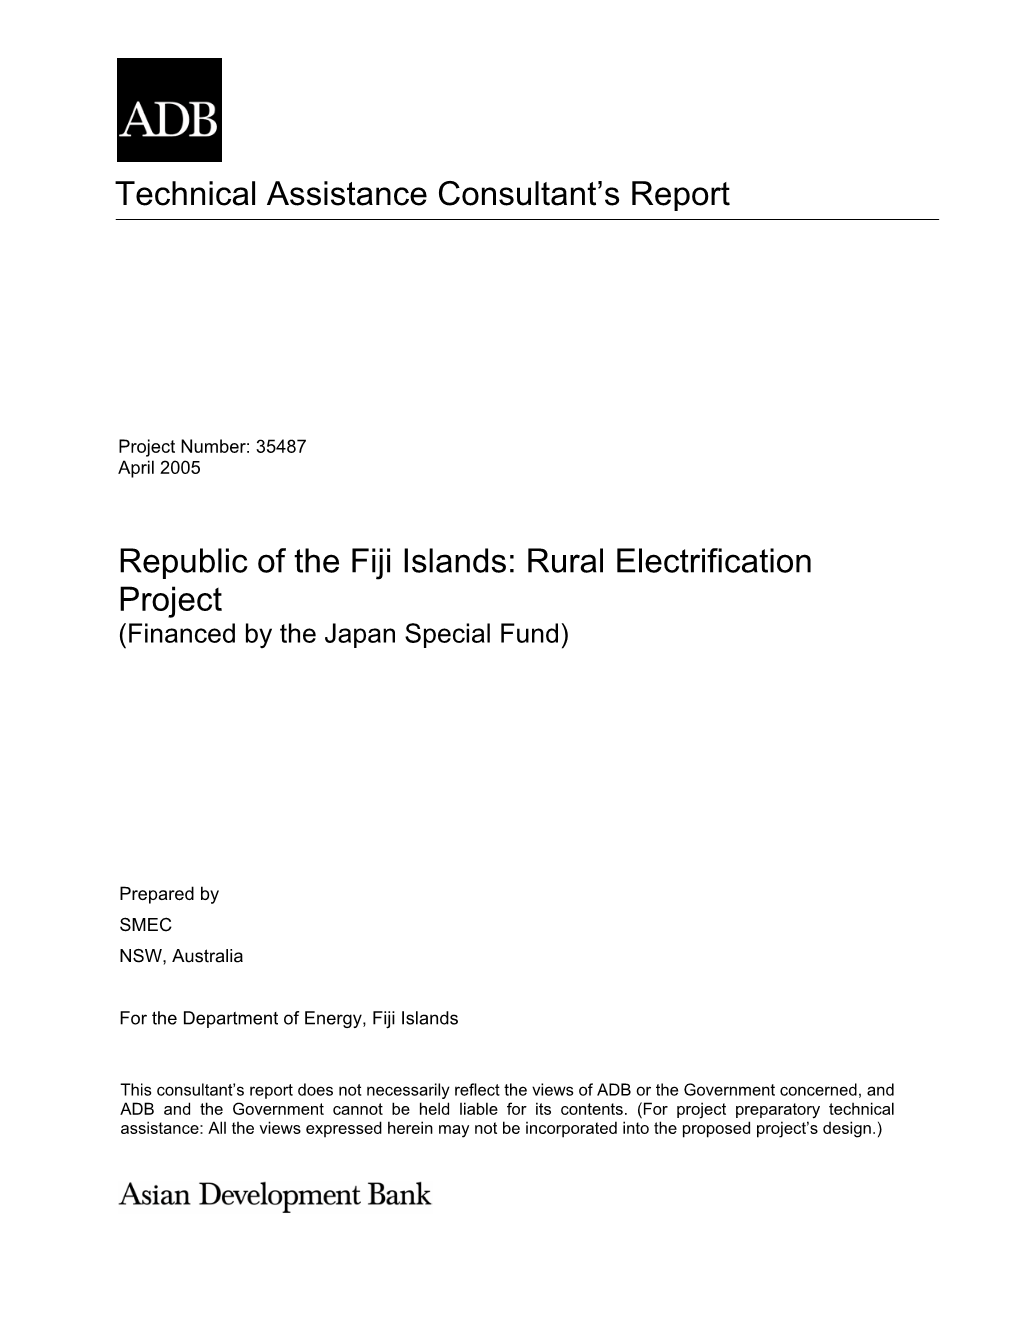 Rural Electrification Project (Financed by the Japan Special Fund)